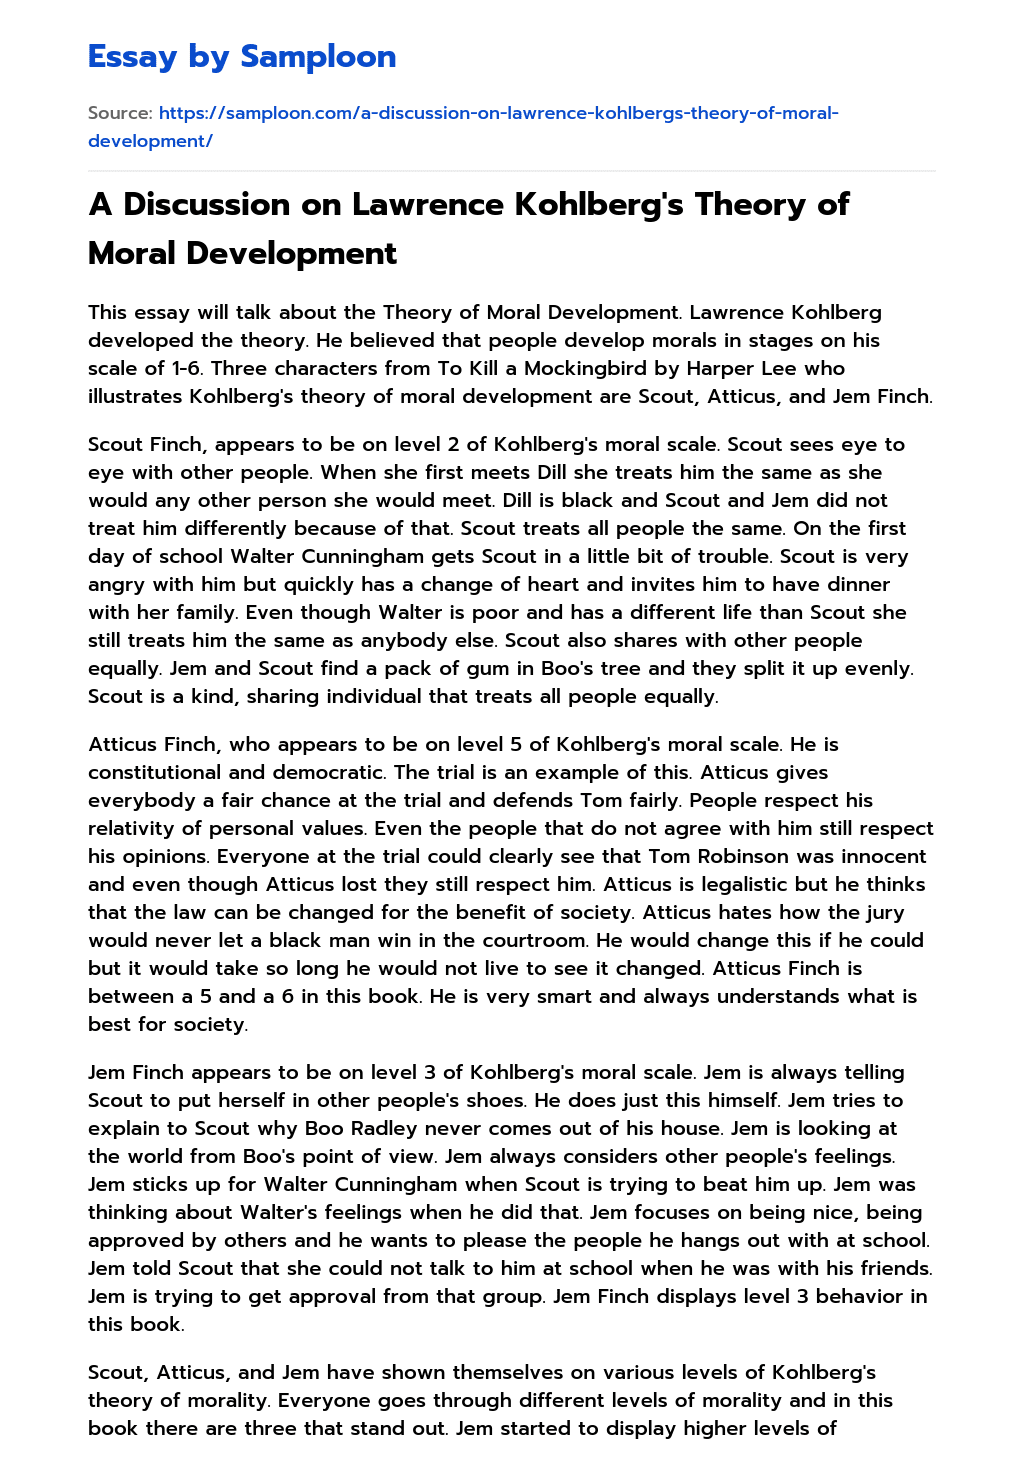 A Discussion on Lawrence Kohlberg’s Theory of Moral Development essay